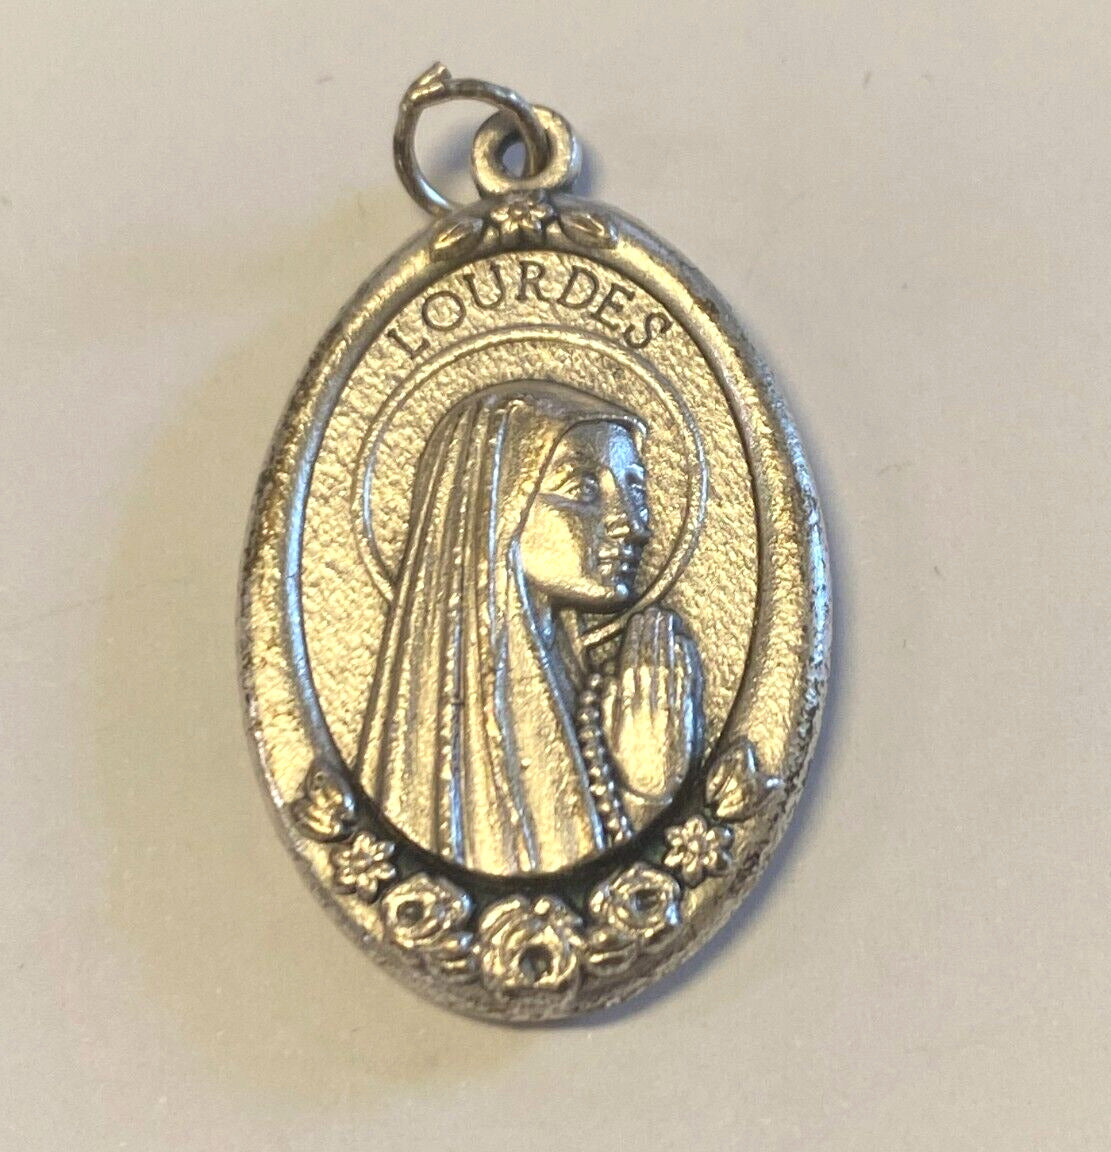 Our Lady of Lourdes/St Bernadette Oval 2 sided medal, new from France